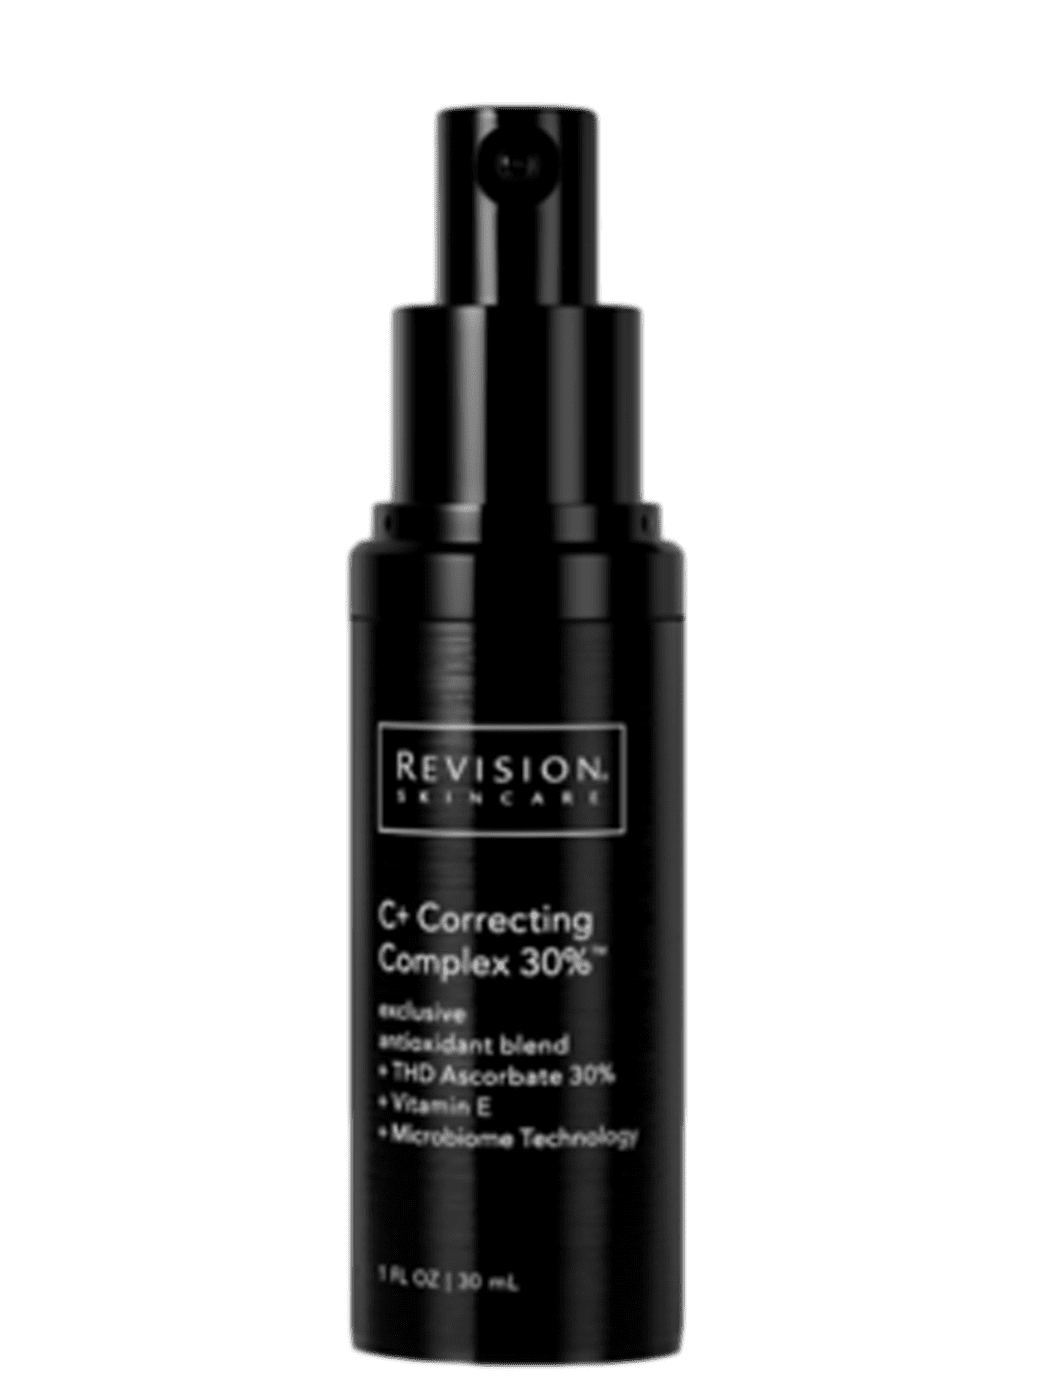 Revision Skincare C+ Correcting Complex 30% – Skin Type Solutions